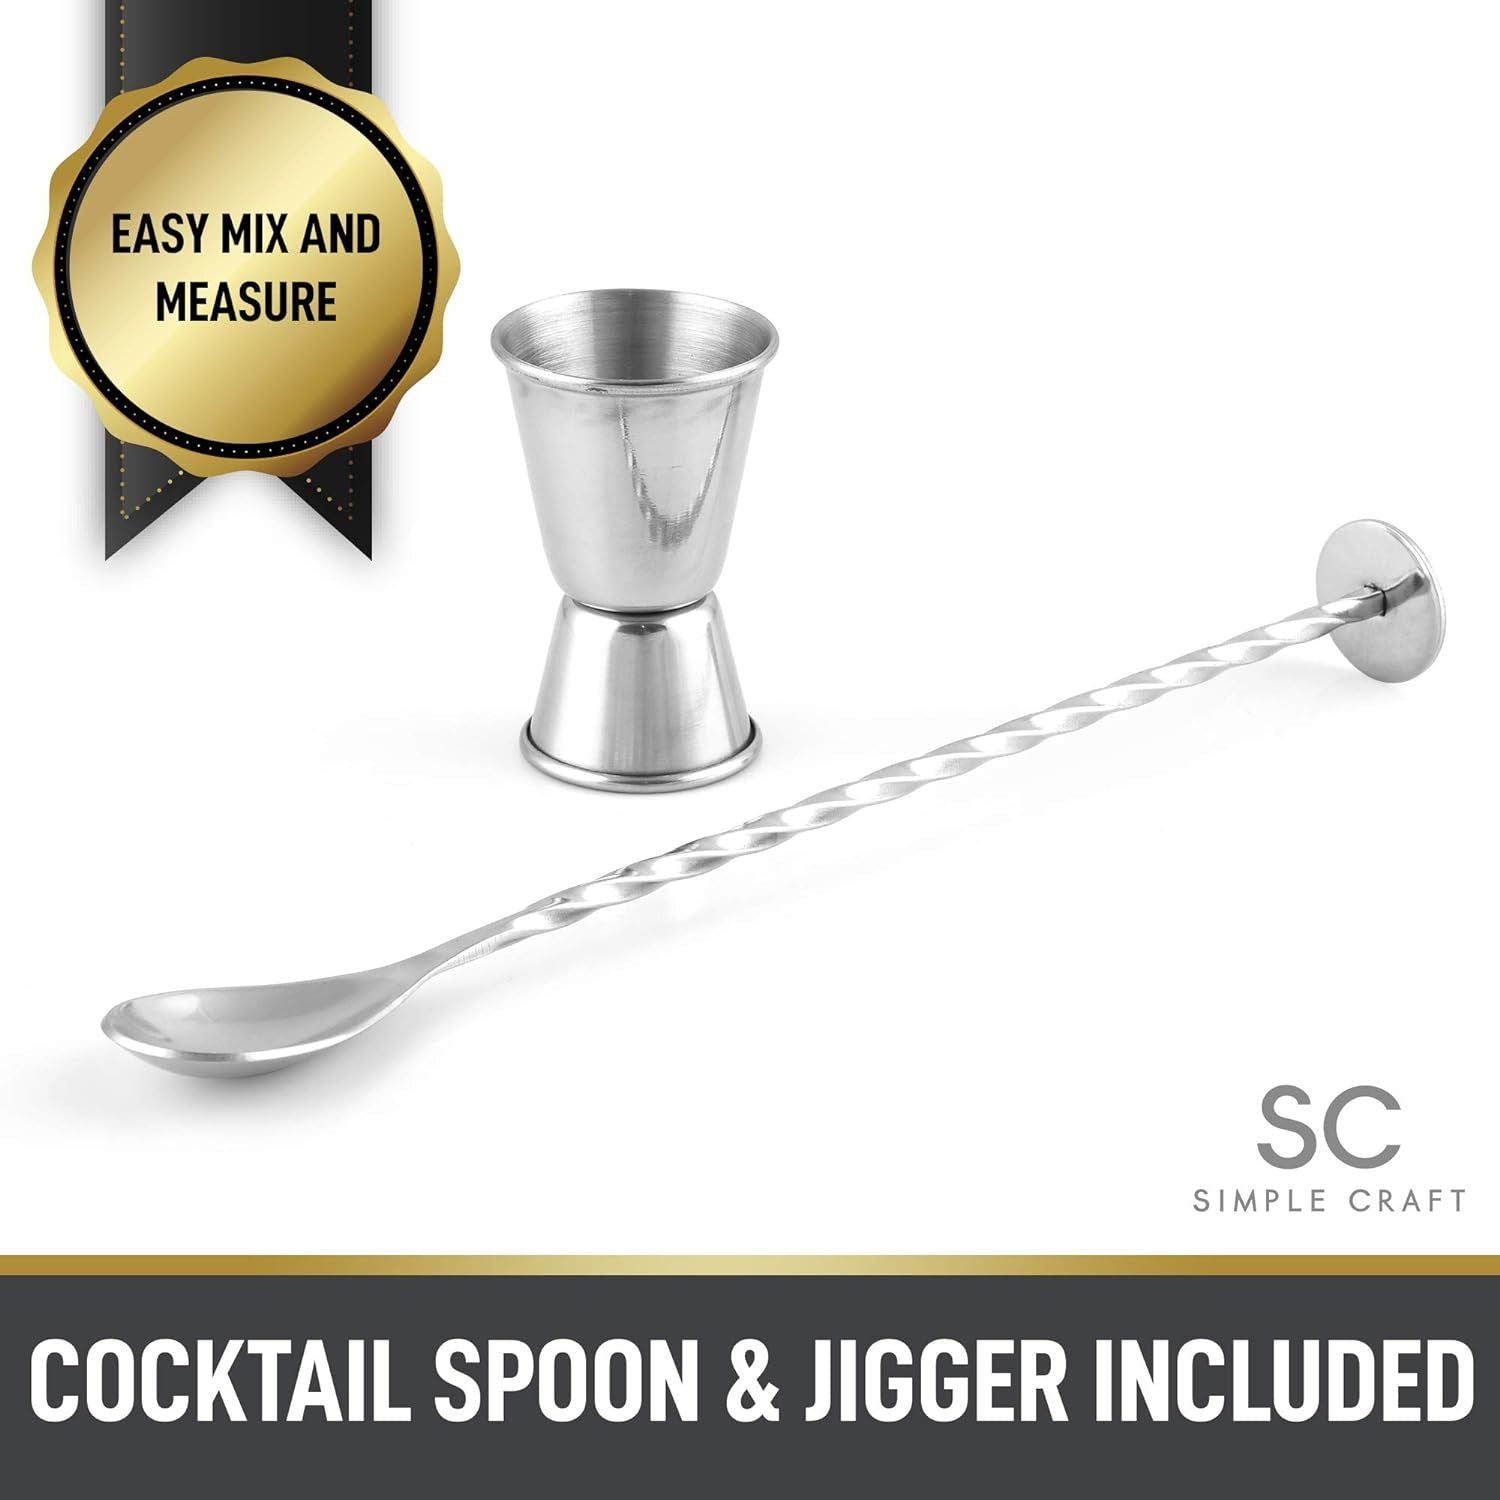 Zulay Kitchen Cocktail Shaker Stainless Steel Drink Mixer with Strainer 24  oz Silver Tumbler